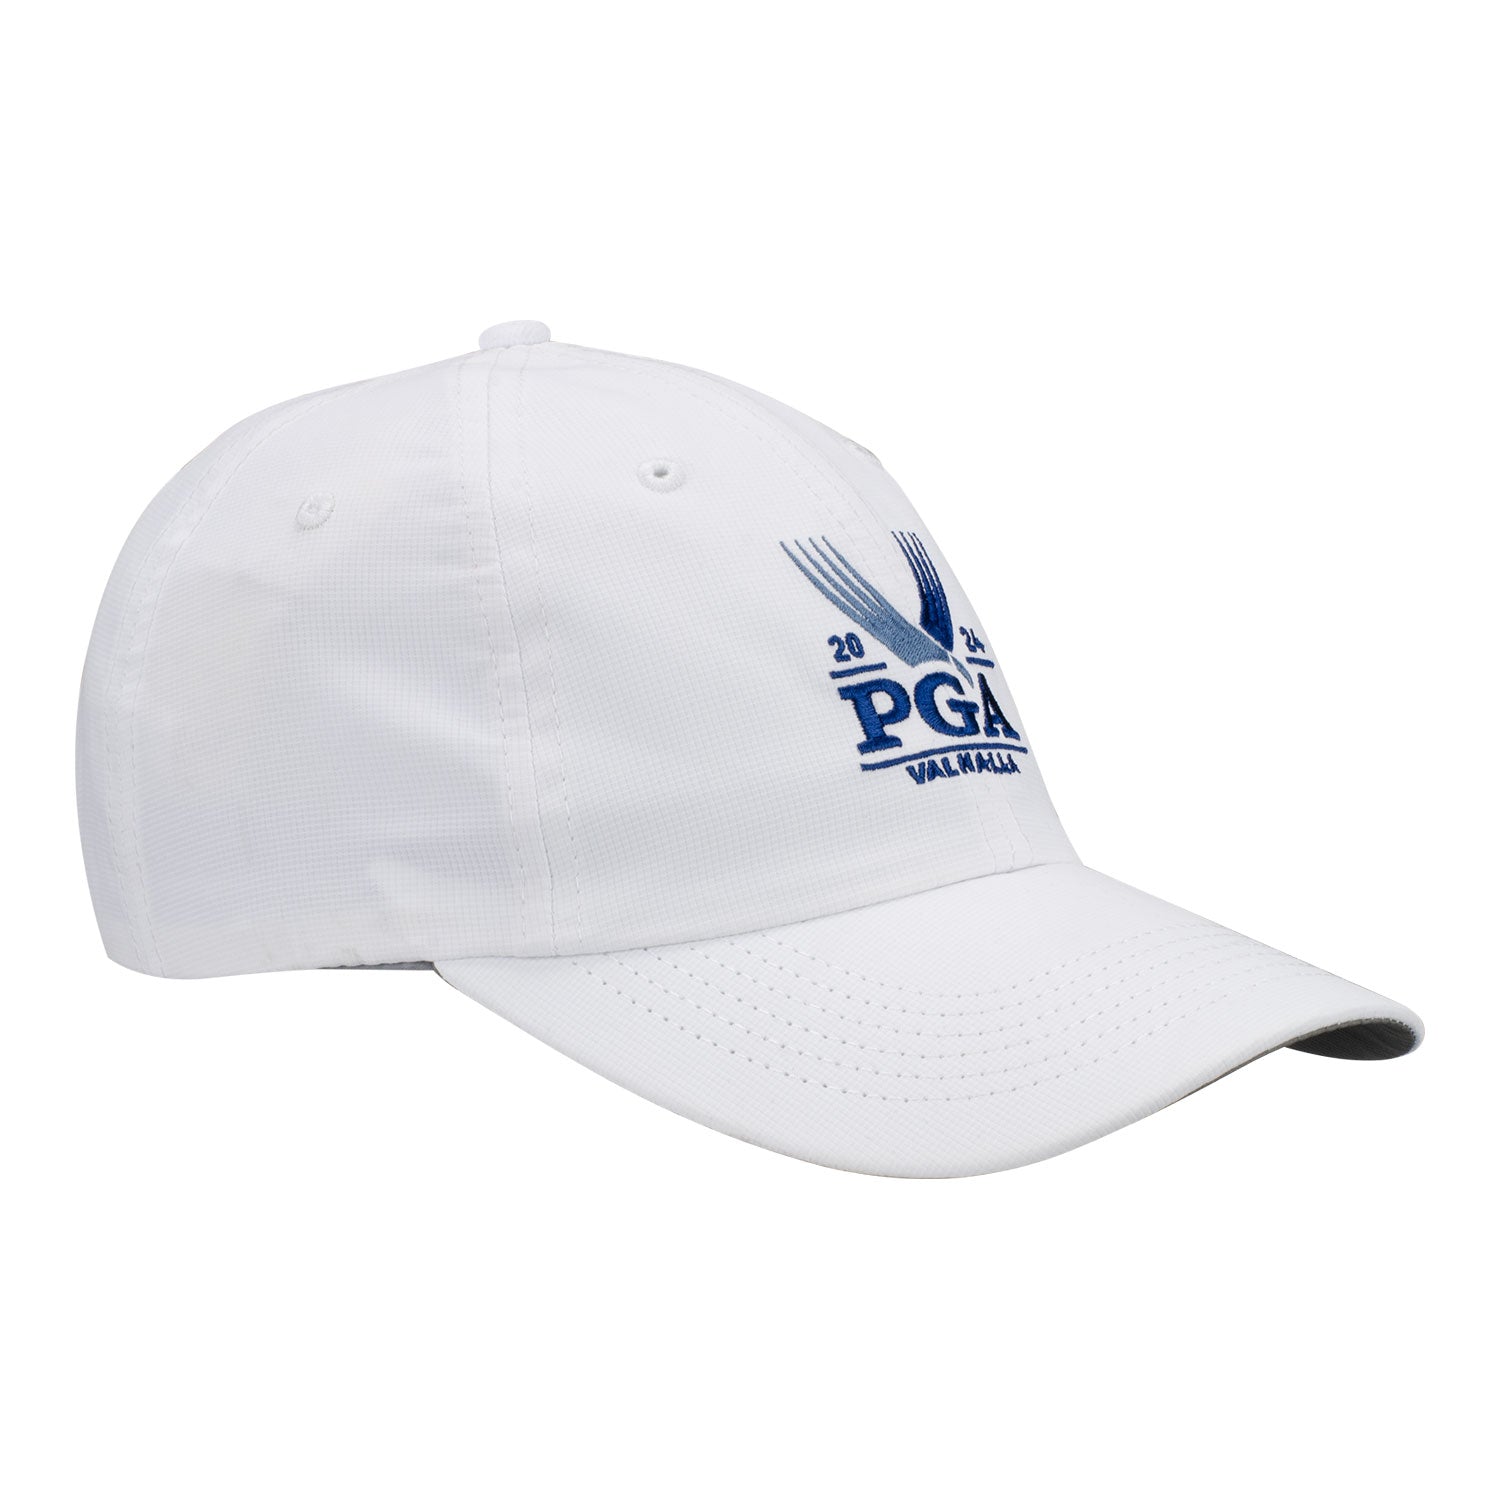 Imperial 2024 Pga Championship X210P The Original Performance Hat in White / Navy